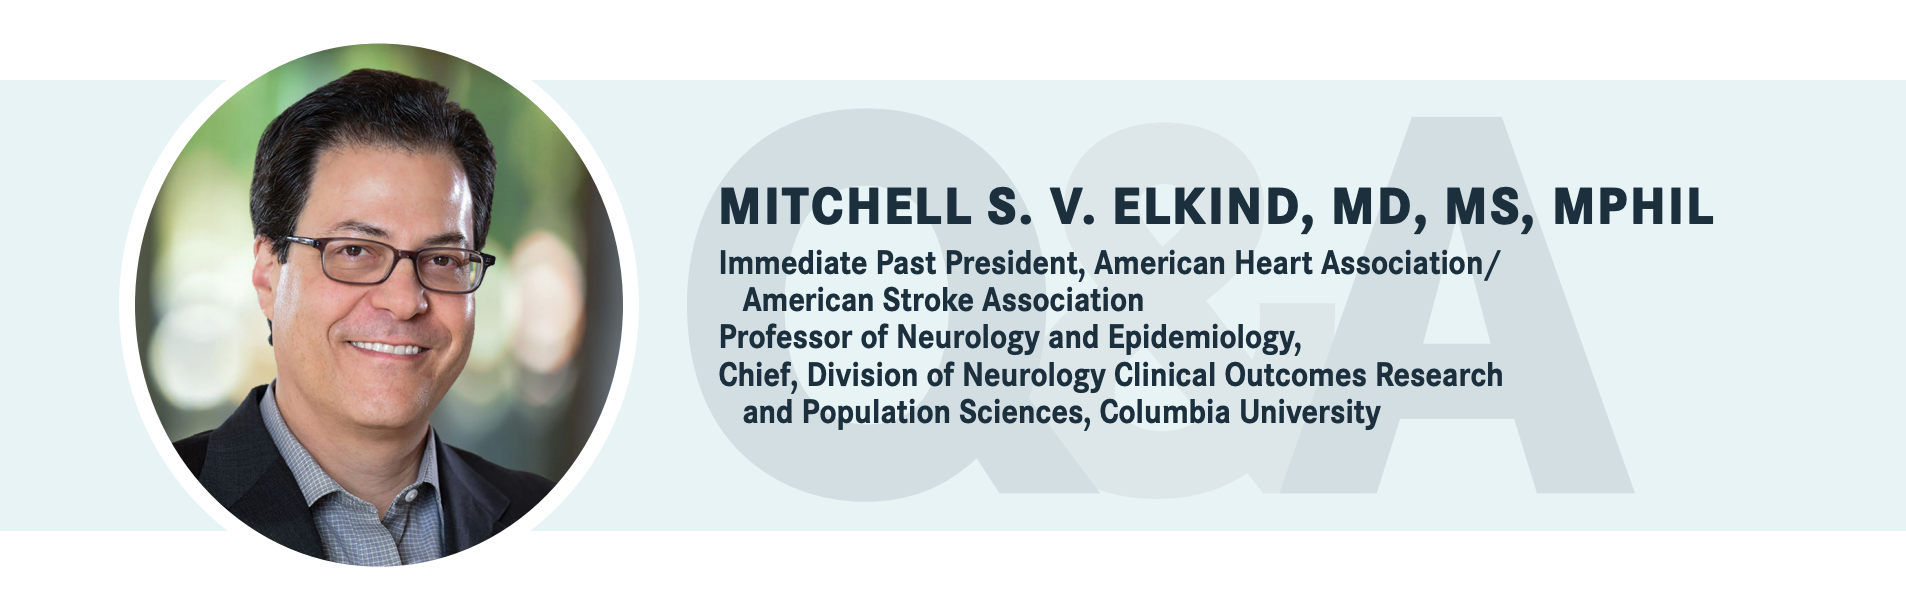 MITCHELL S. V. ELKIND, MD, MS, MPHIL, Immediate Past President, American Heart Association/ American Stroke Association Professor of Neurology and Epidemiology, Chief, Division of Neurology Clinical Outcomes Research and Population Sciences, Columbia University